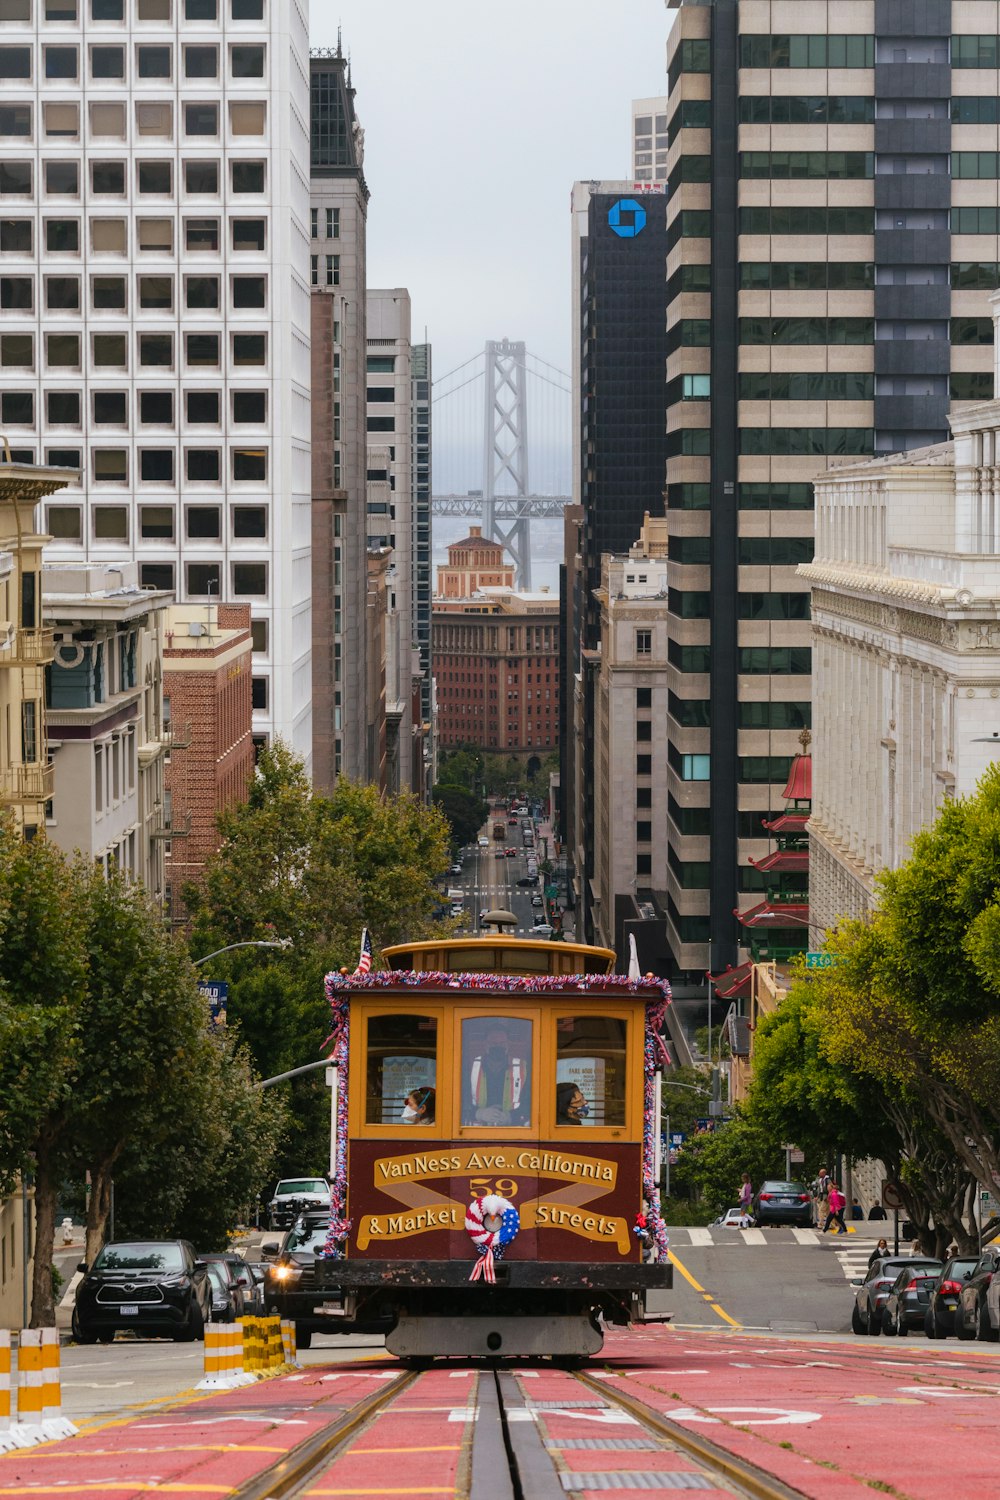 a trolley car traveling down a street next to tall buildings